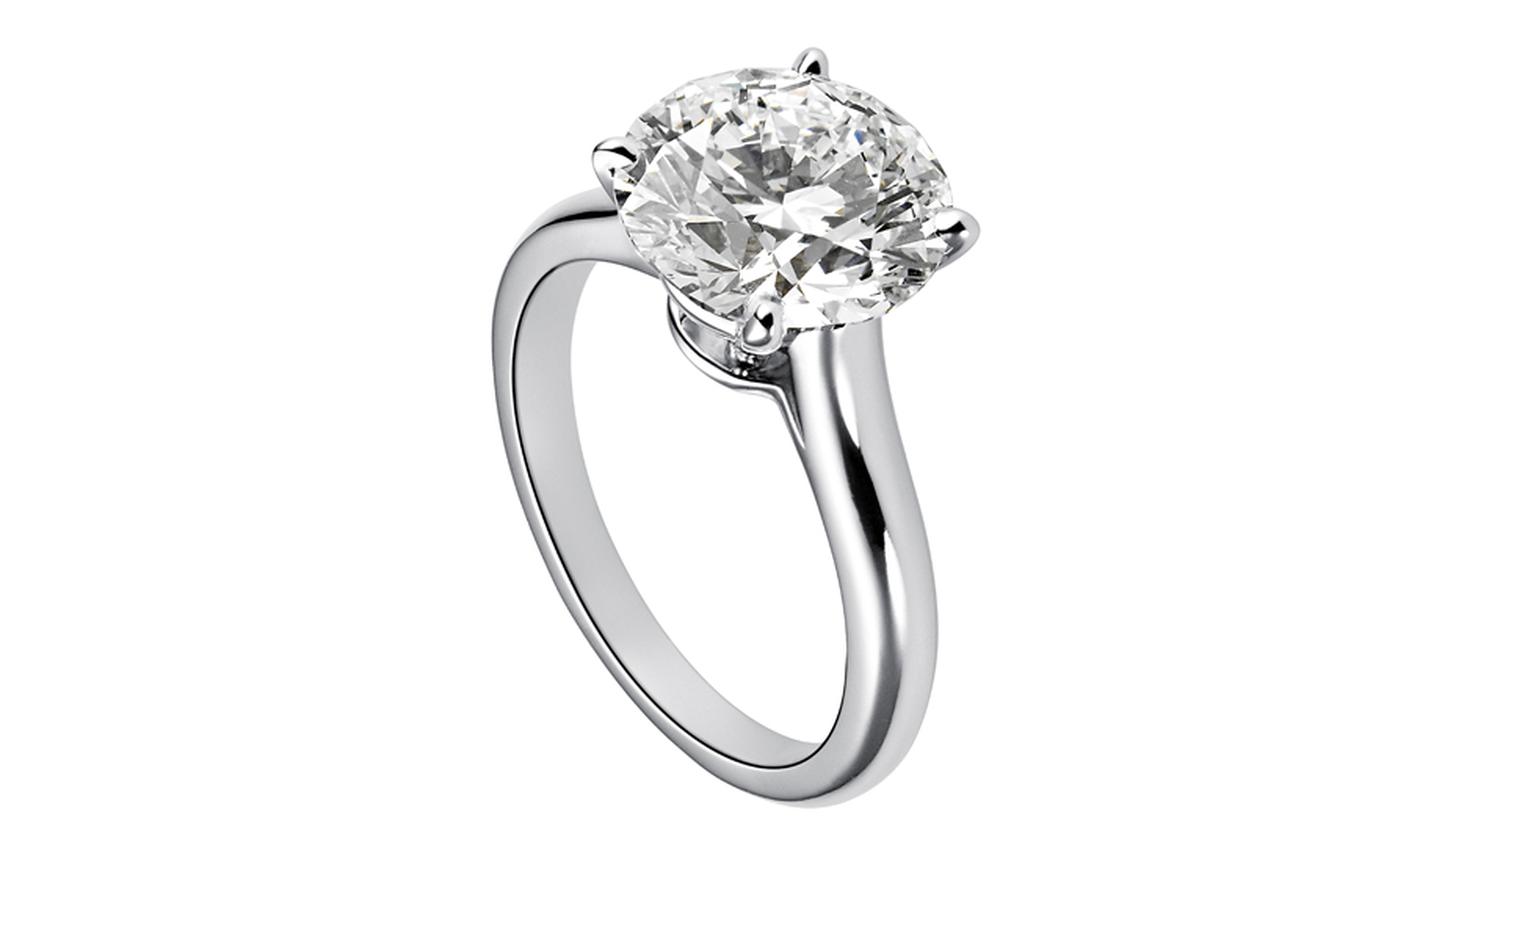 CARTIER, Set For You collection, solitaire ring. POA